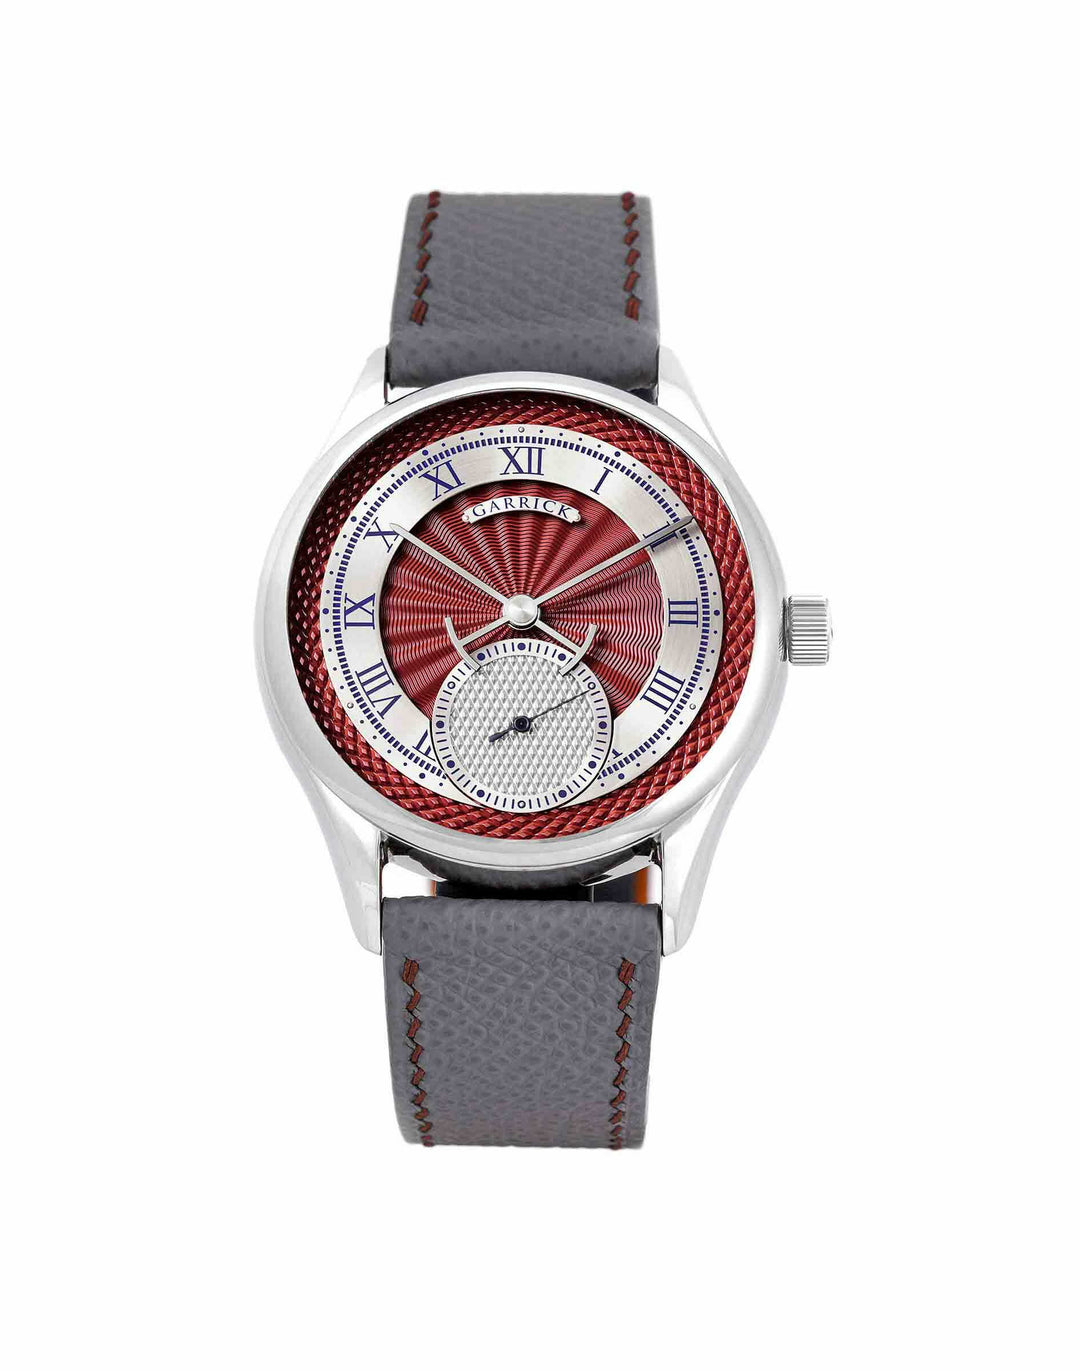 English made S7 watch with red guilloche dial by Garrick Watchmakers